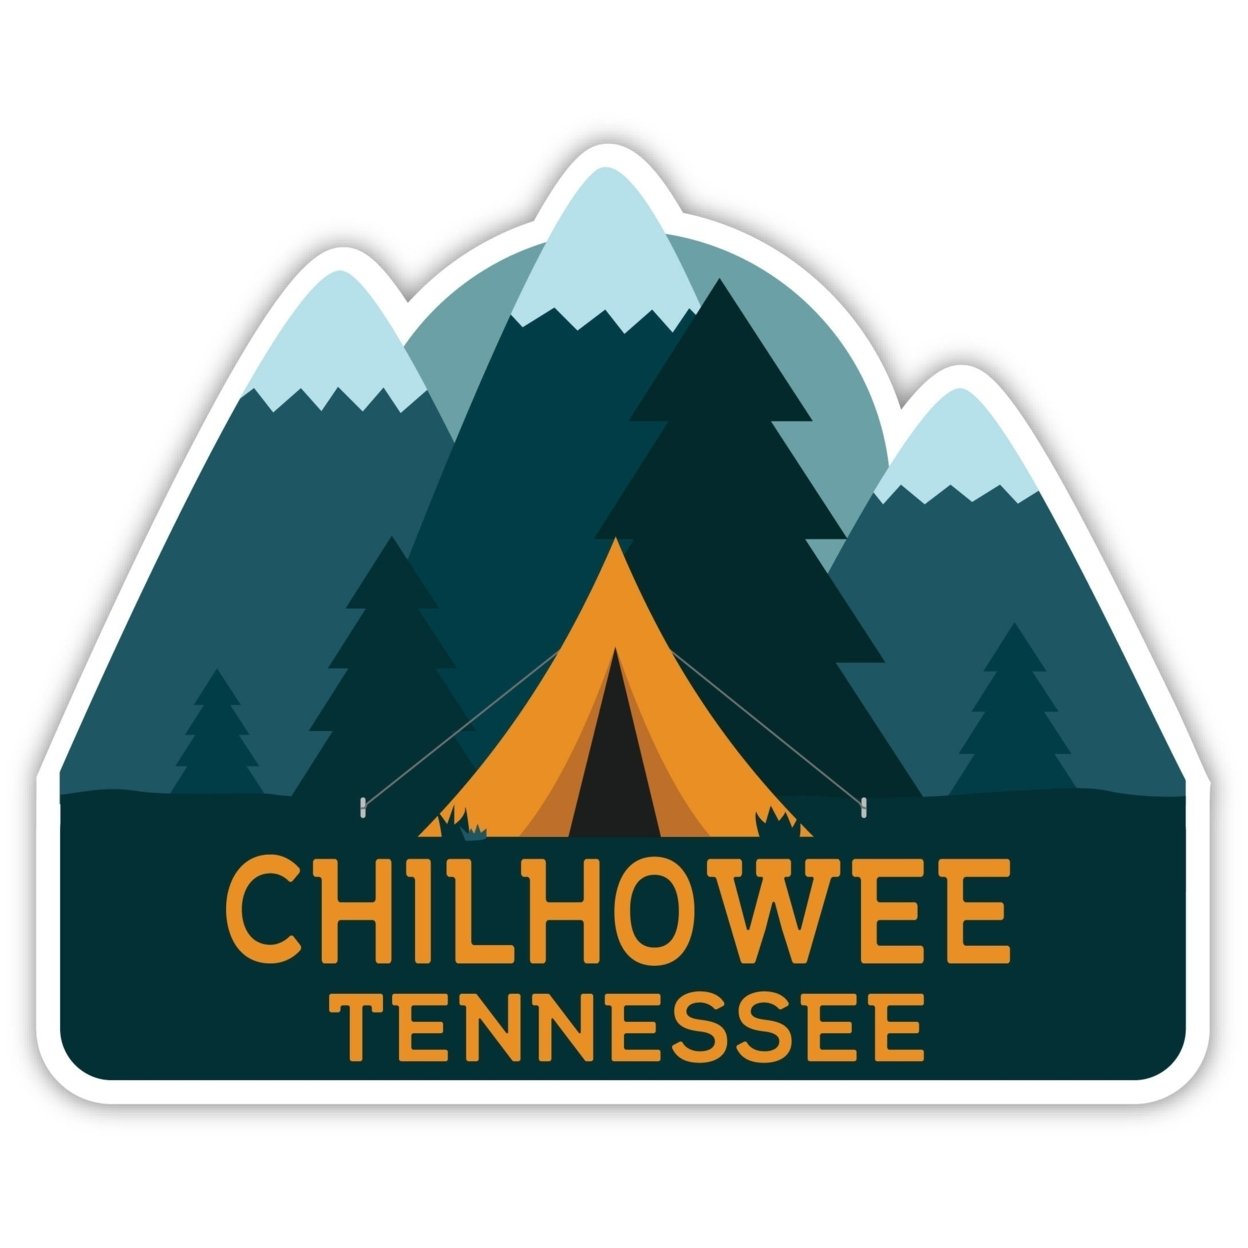 Chilhowee Tennessee Souvenir Decorative Stickers (Choose Theme And Size) - Single Unit, 8-Inch, Tent